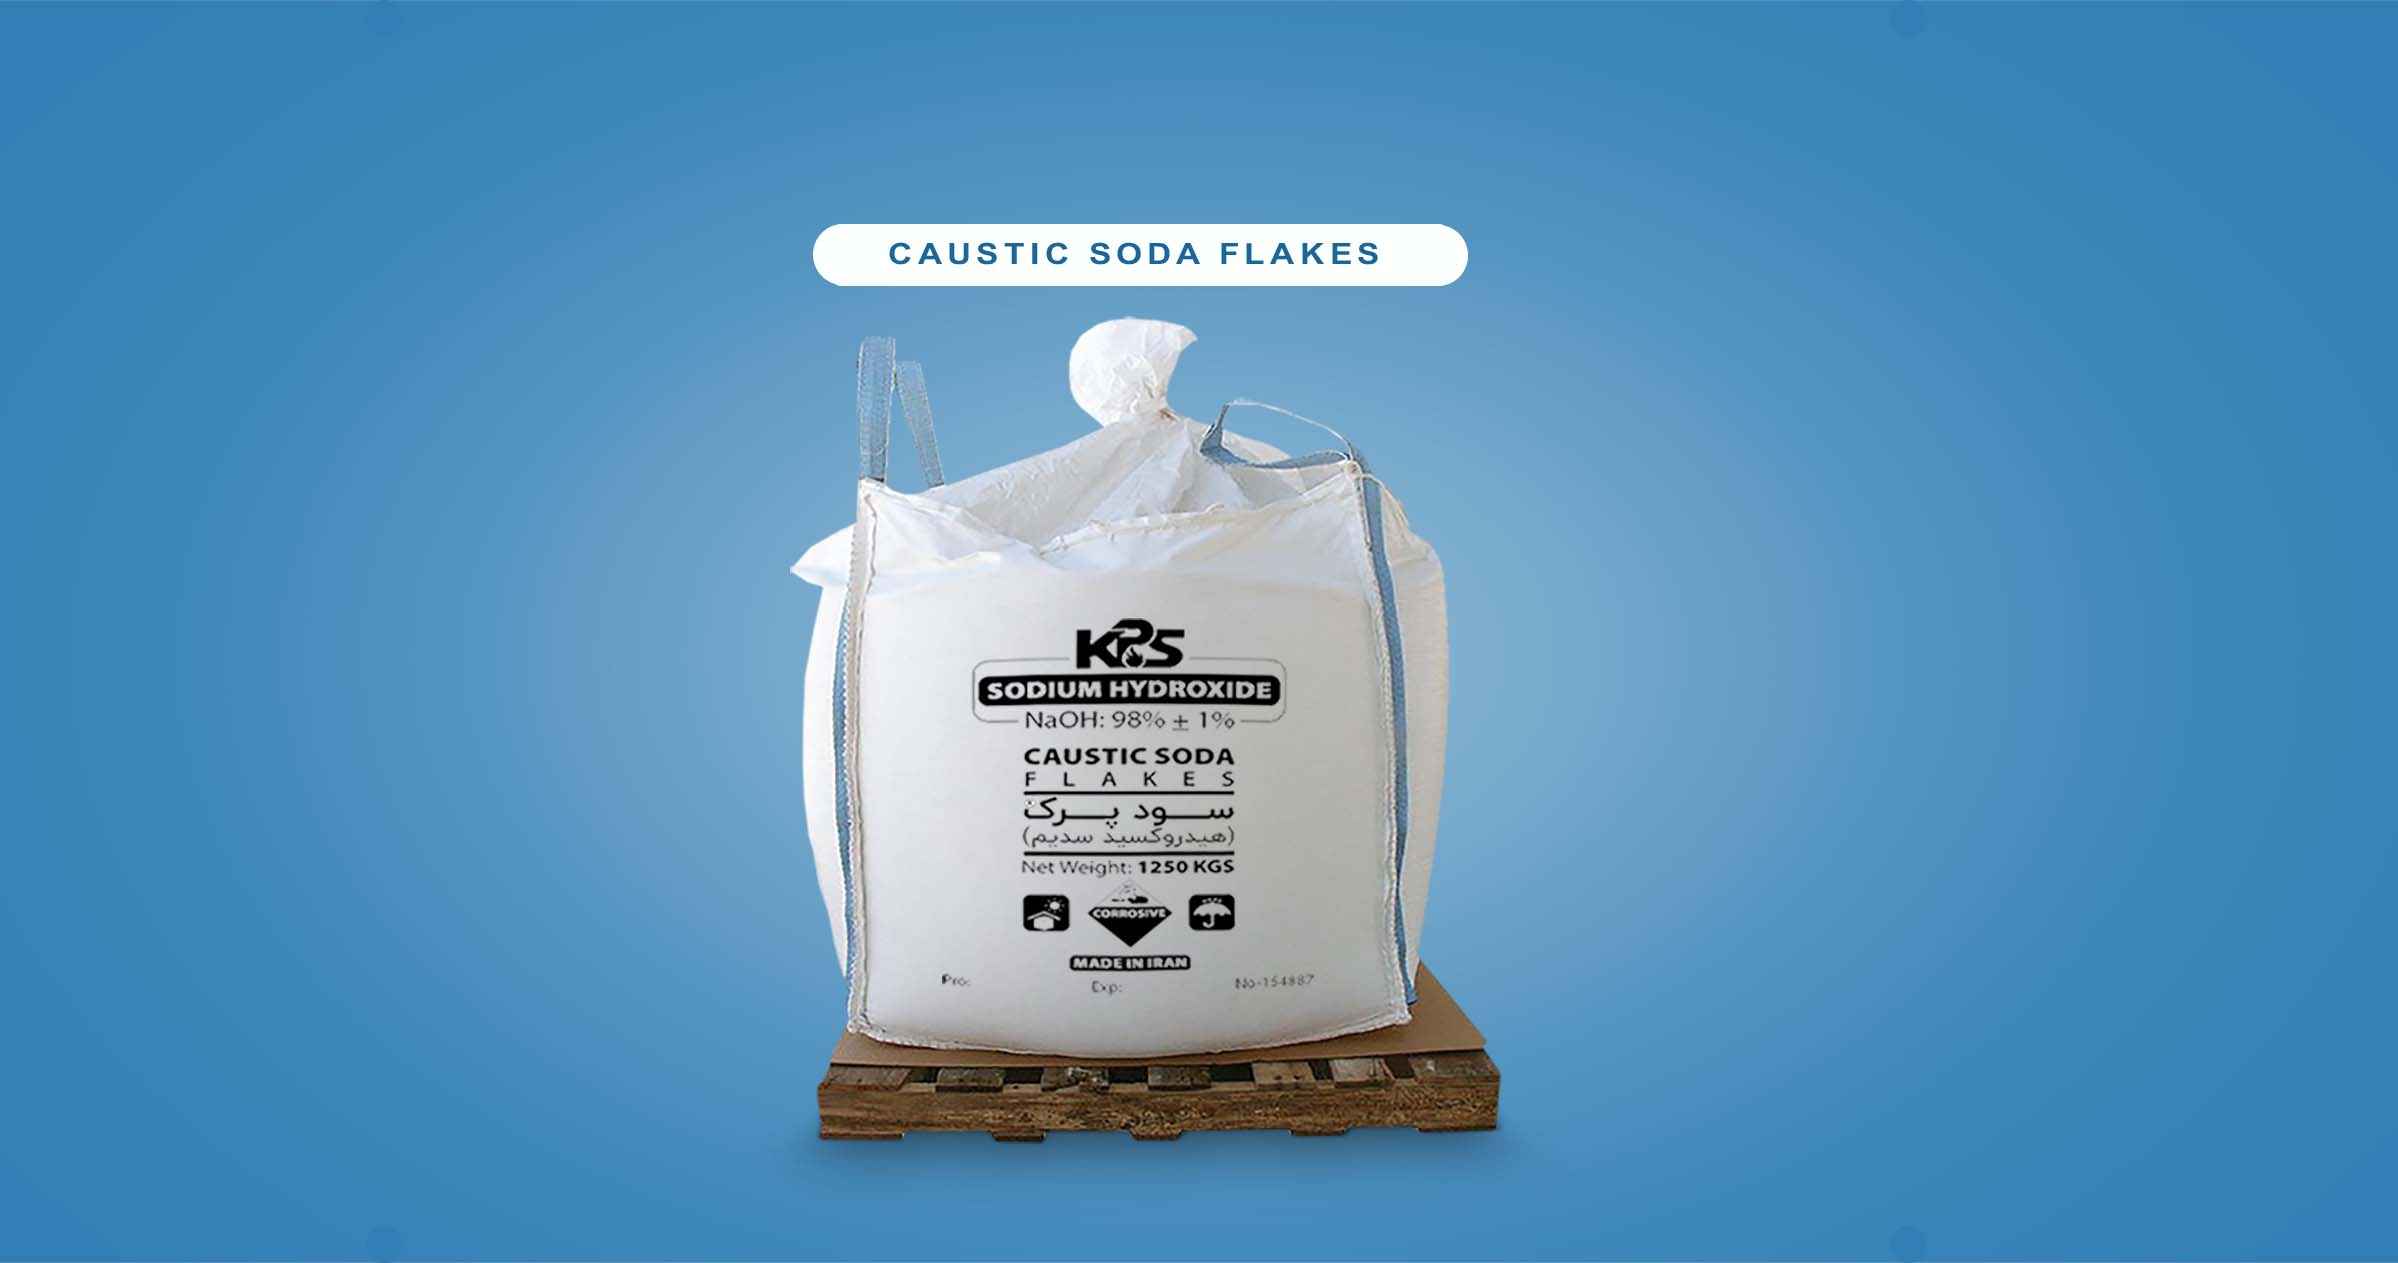 Caustic Soda widely used in soap making